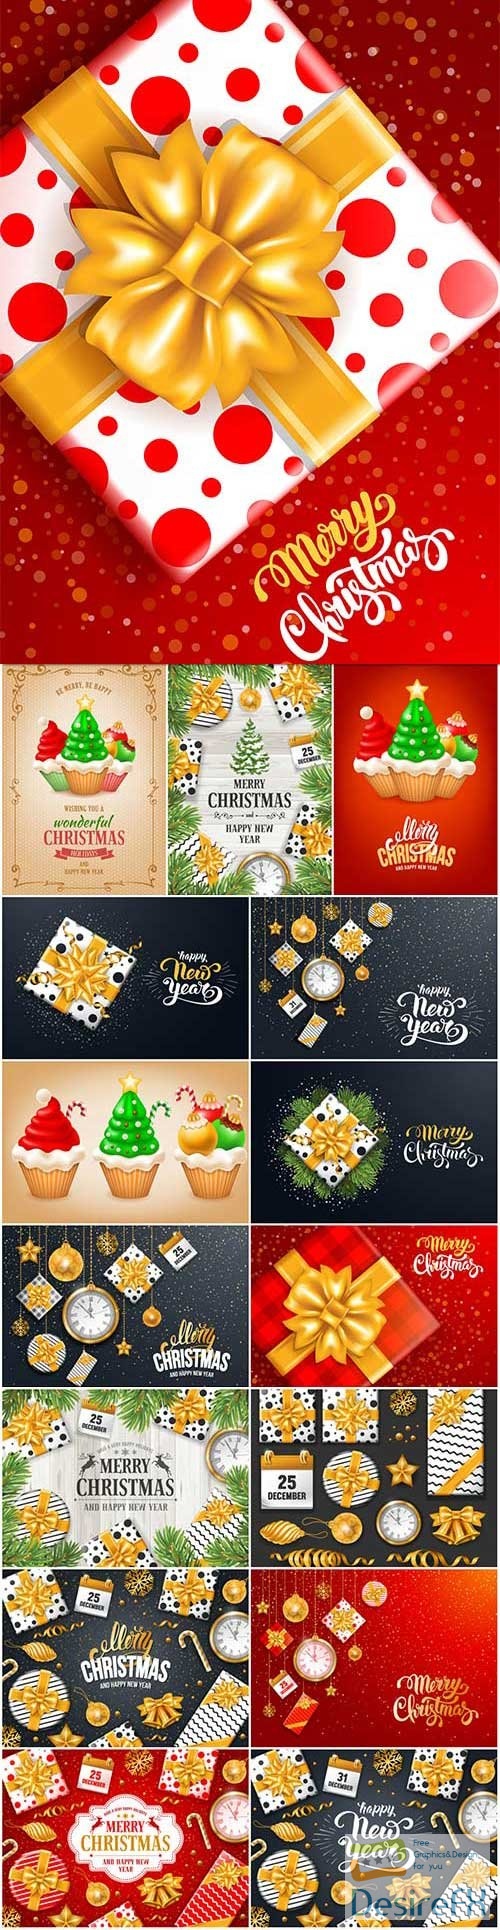 New Year and Christmas vector vol 8